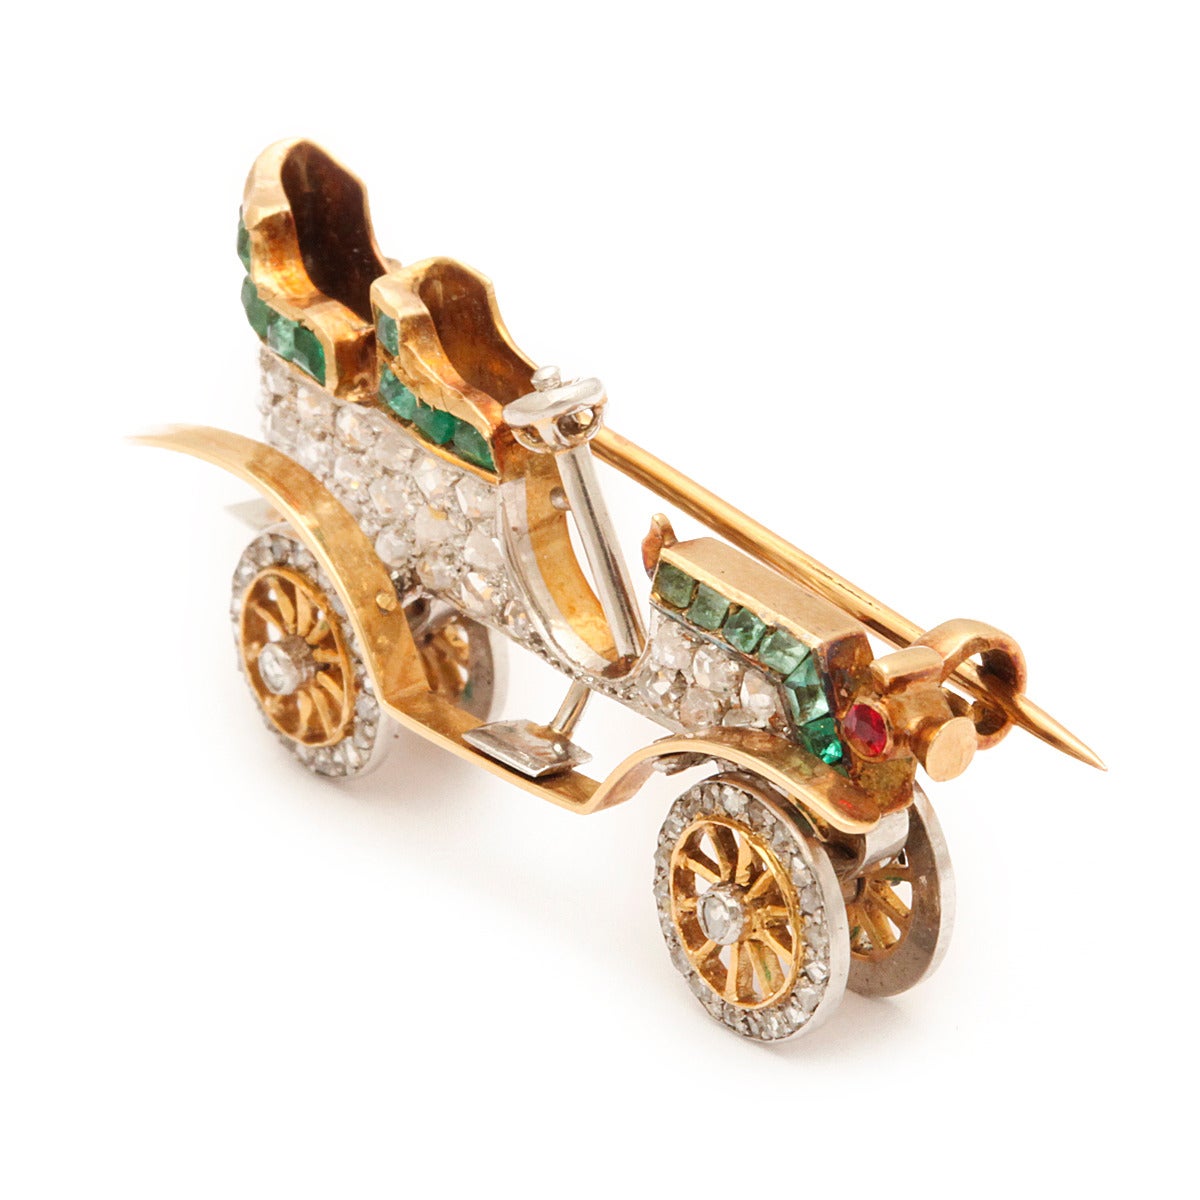 Antique brooch designed as a vintage car with pavé rose-cut diamond body, rotating diamond wheels and emerald detailing. Set in gold and platinum.